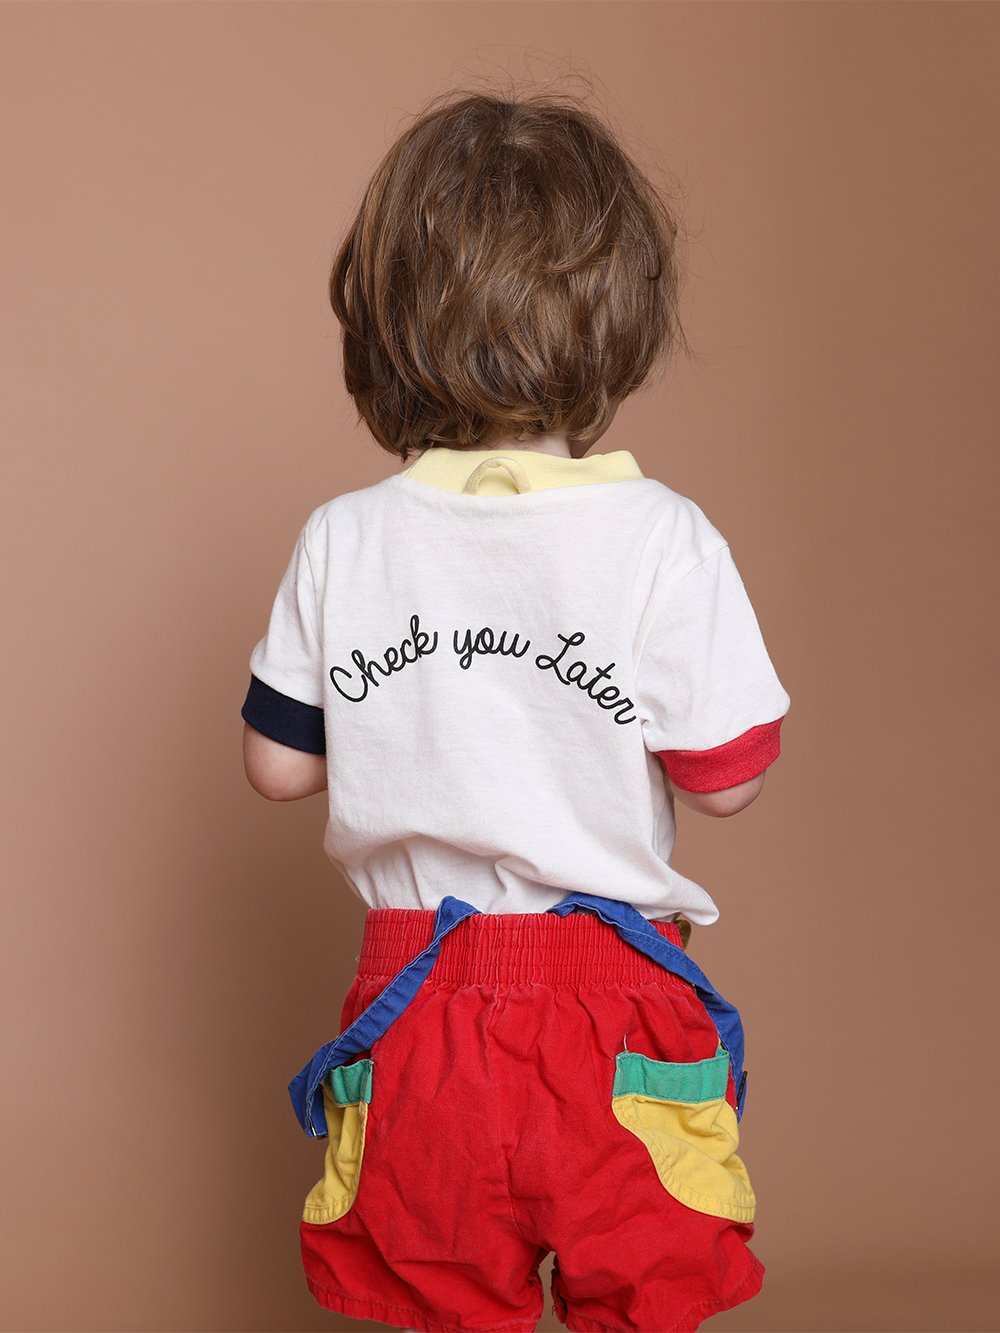 Kid with their back facing towards the camera wearing a shirt embroidered with the phrase check you later